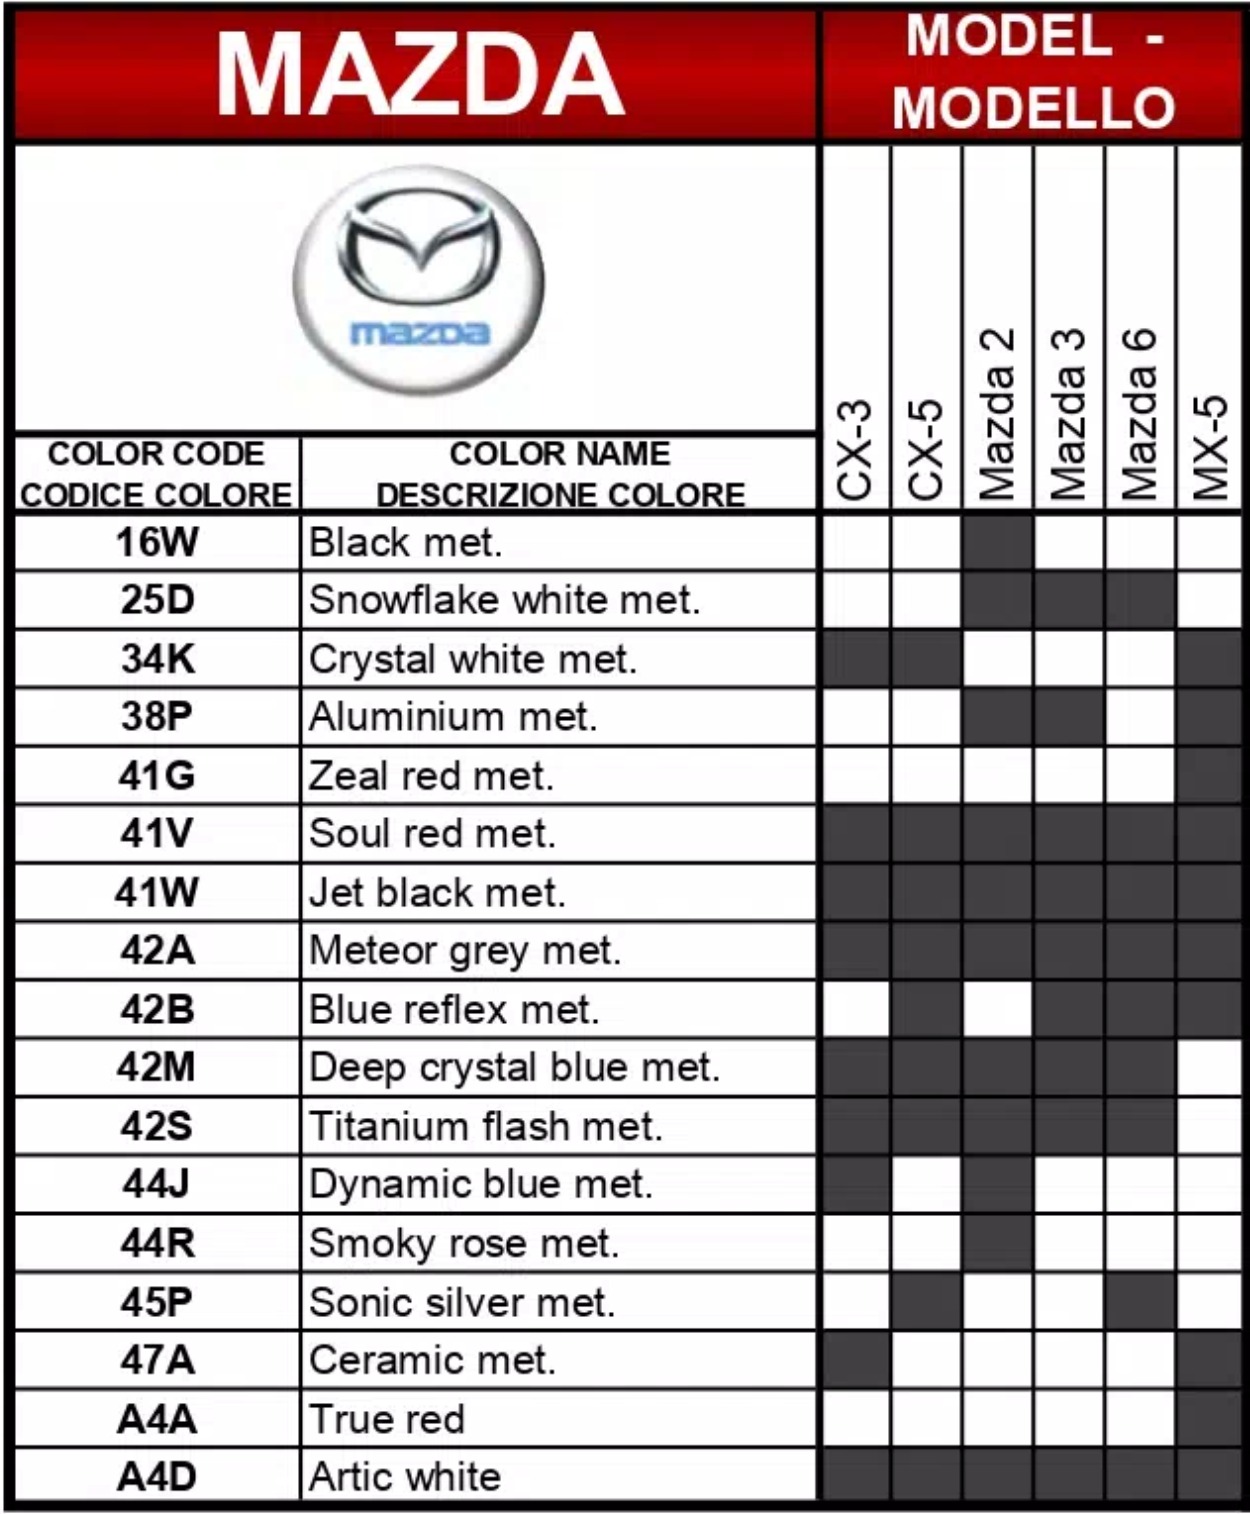 A chart showing what paint codes and their color names go to which vehicle for Mazda automobiles in 2017